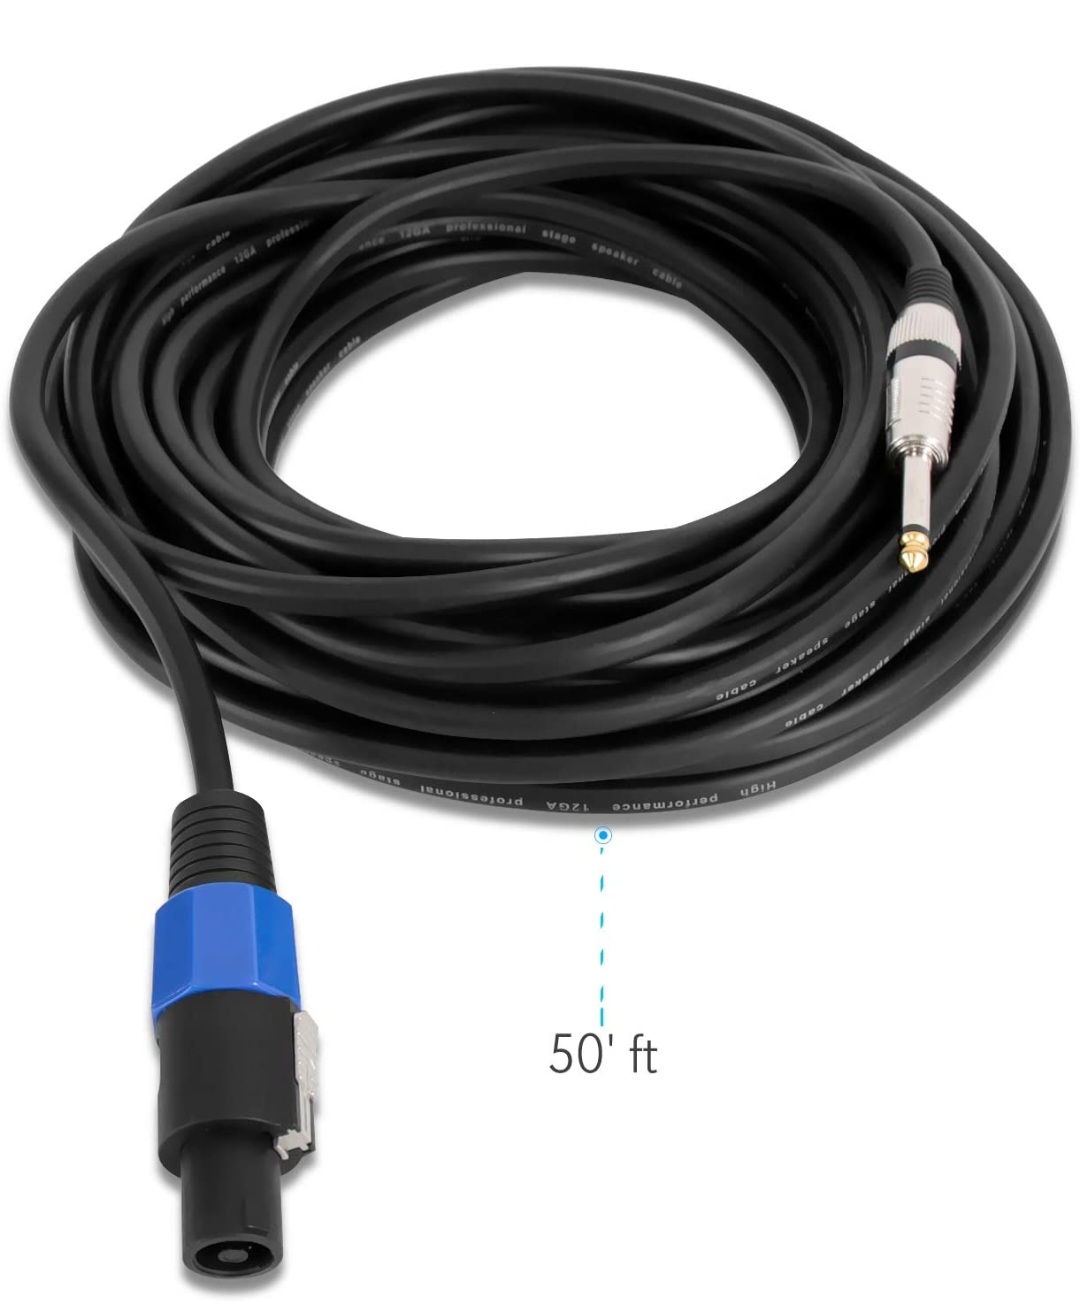 We also have cables for your live sound and entertainment needs!